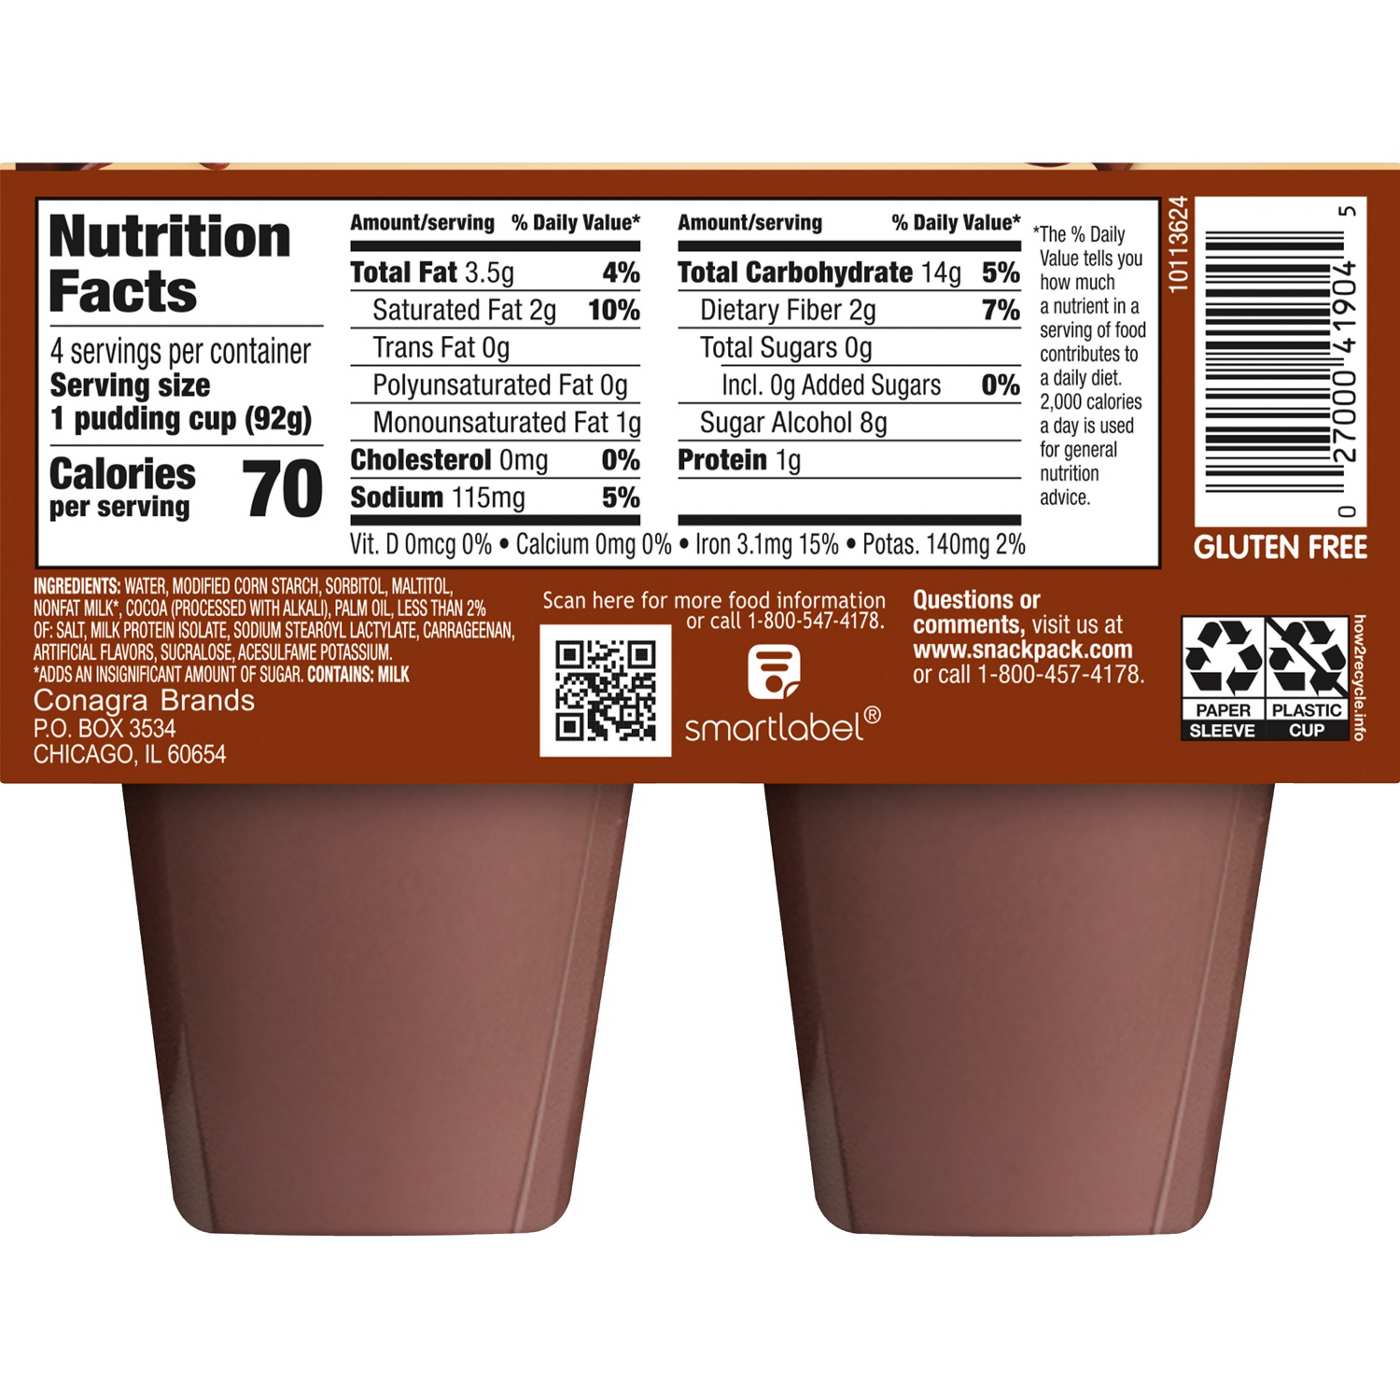 Snack Pack Sugar Free Chocolate Pudding Cups; image 4 of 7